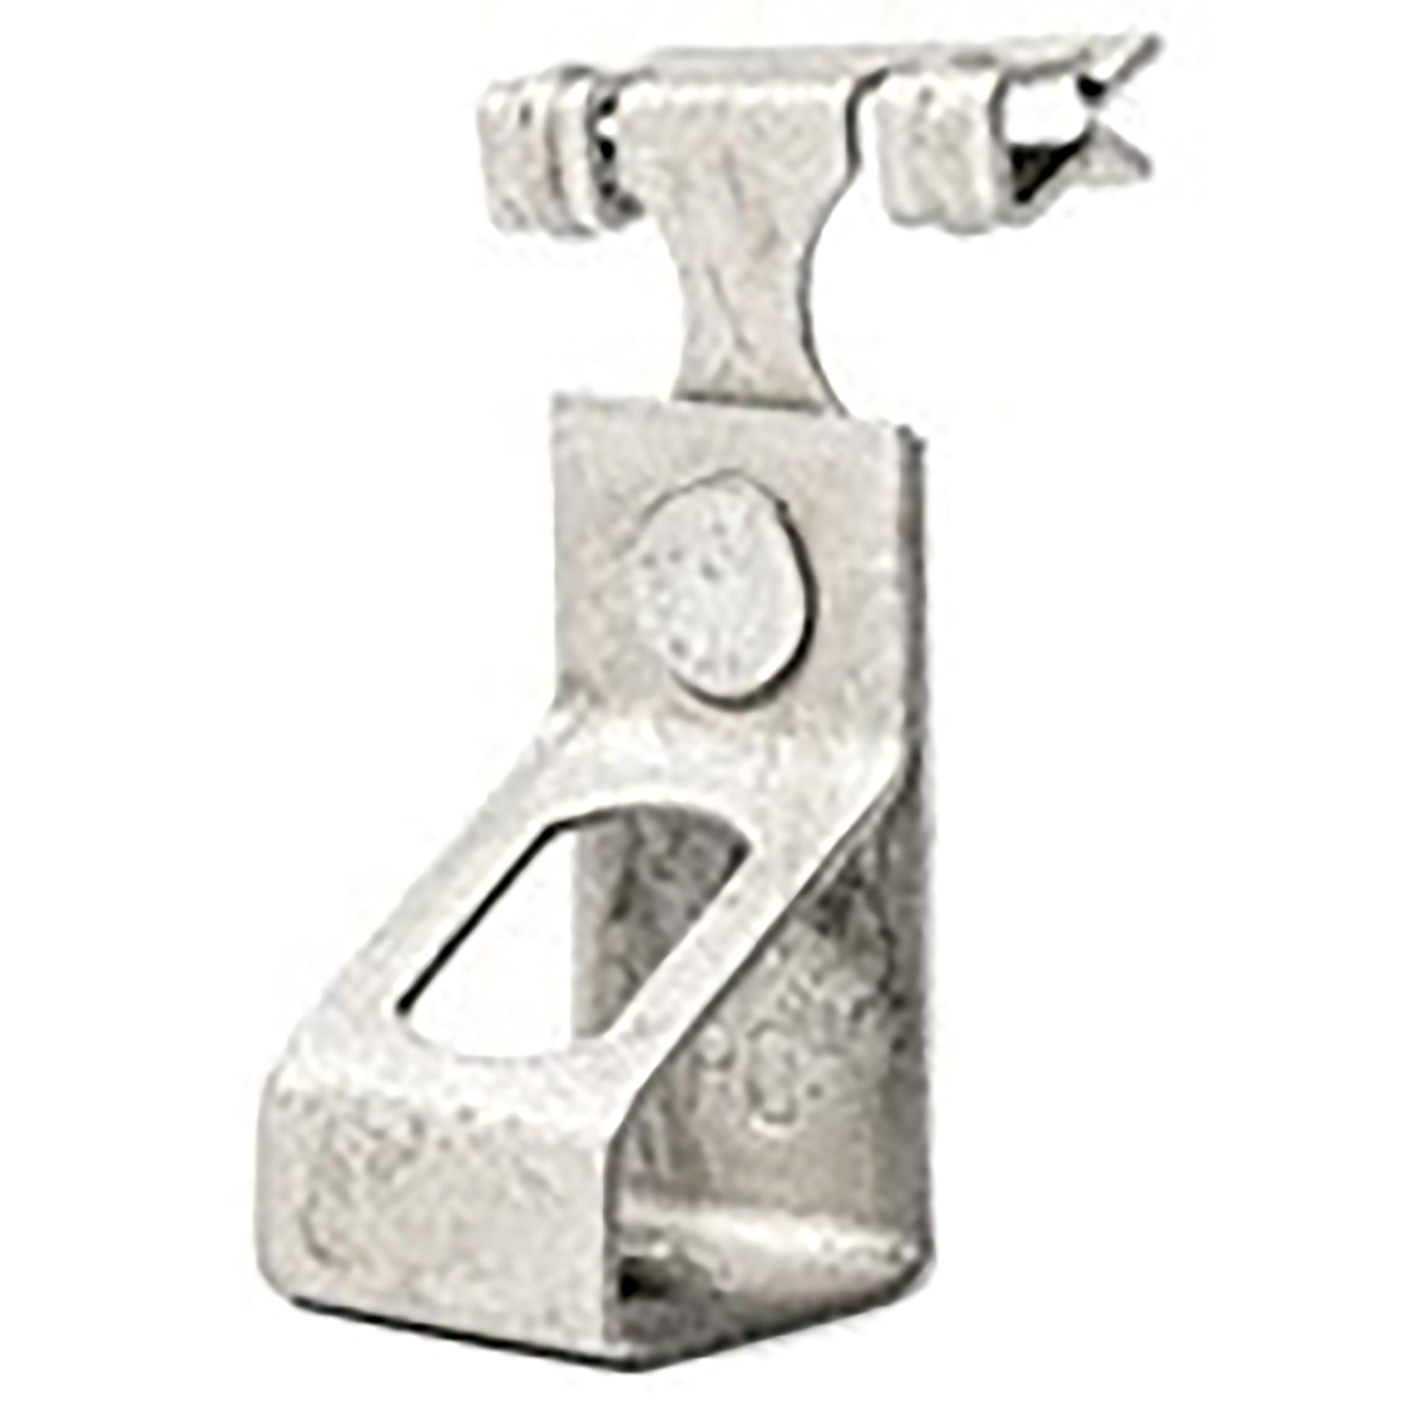 Beam Clamp I Profile M8 x 2-3mm Thickness